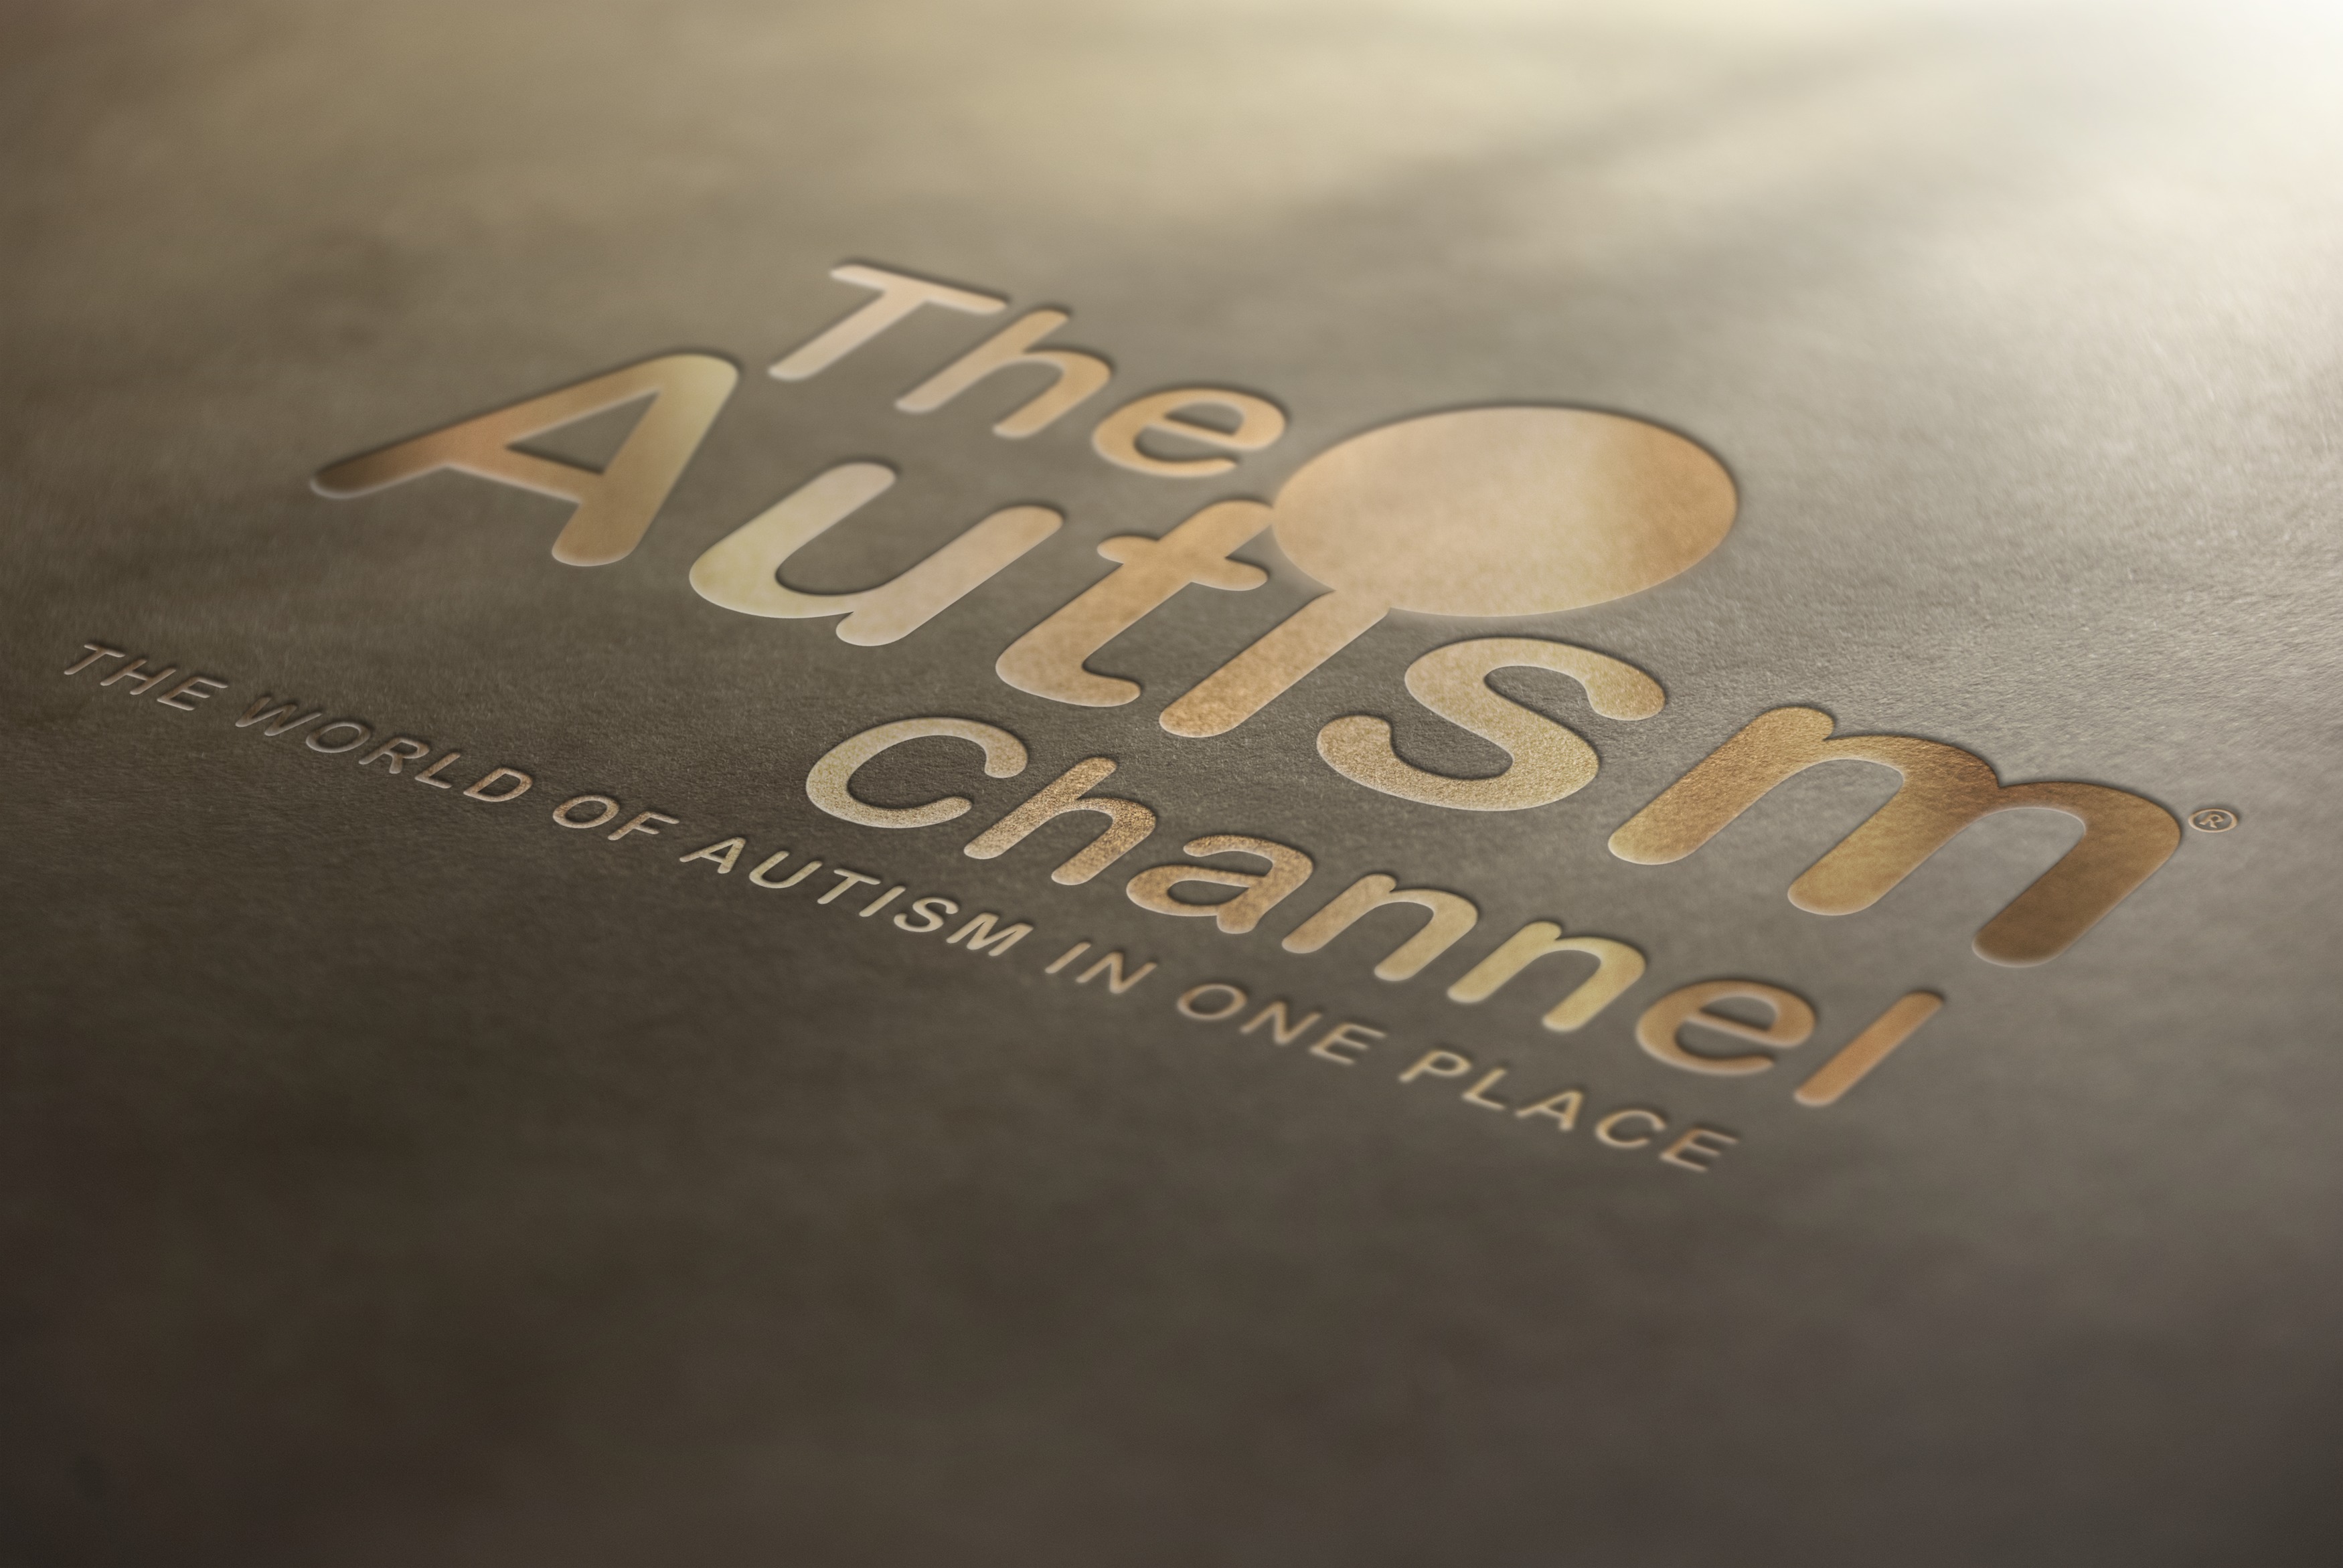 The Autism Channel, streaming worldwide 24/7 The World of autism in one place